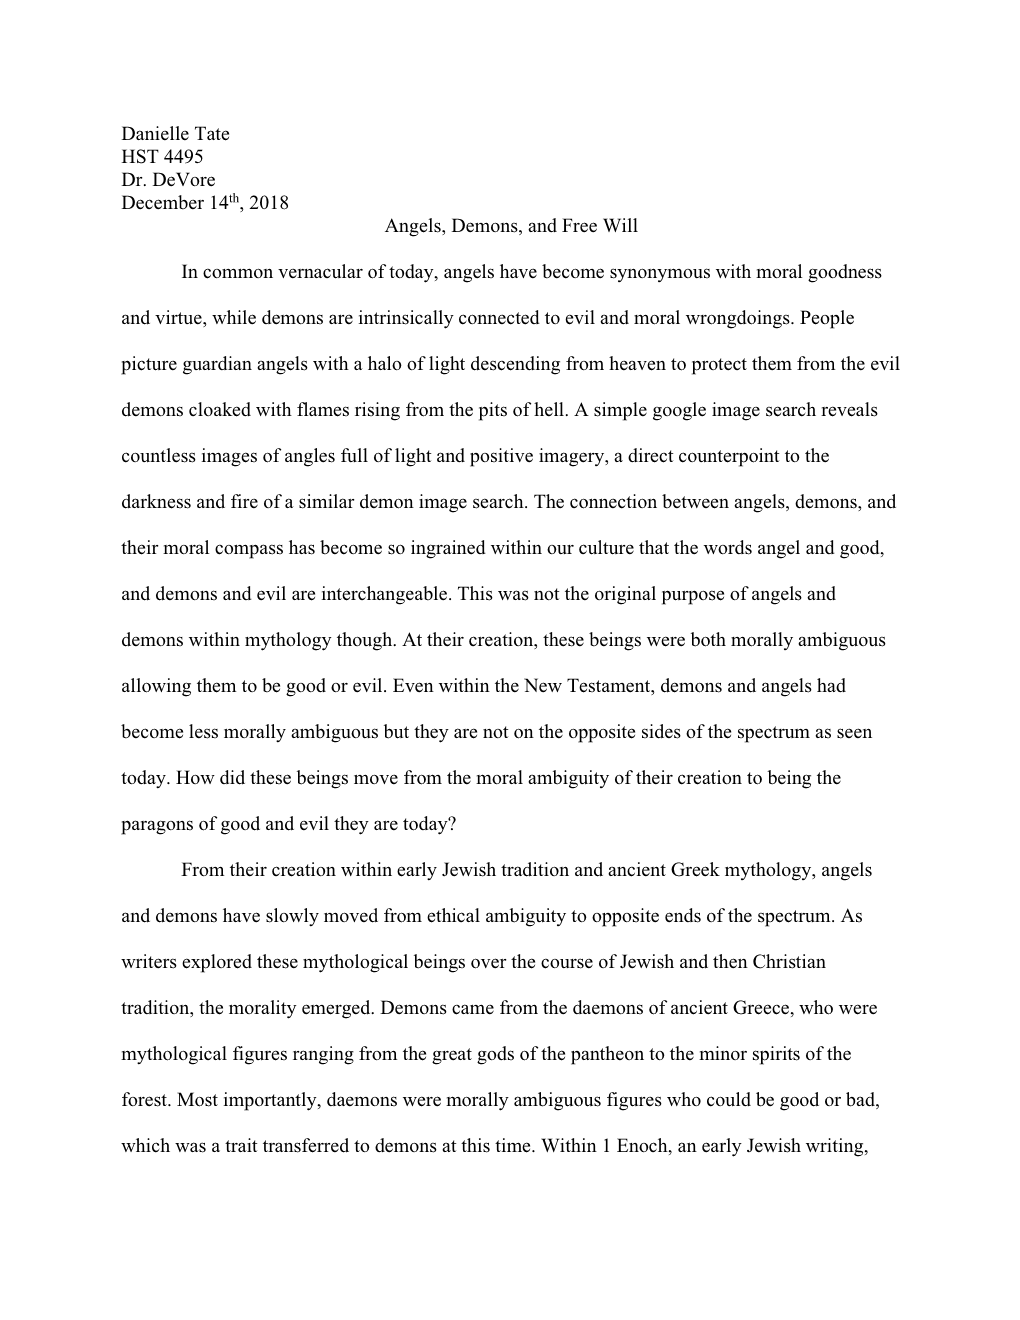 Danielle Tate Angels and Demons Final Paper